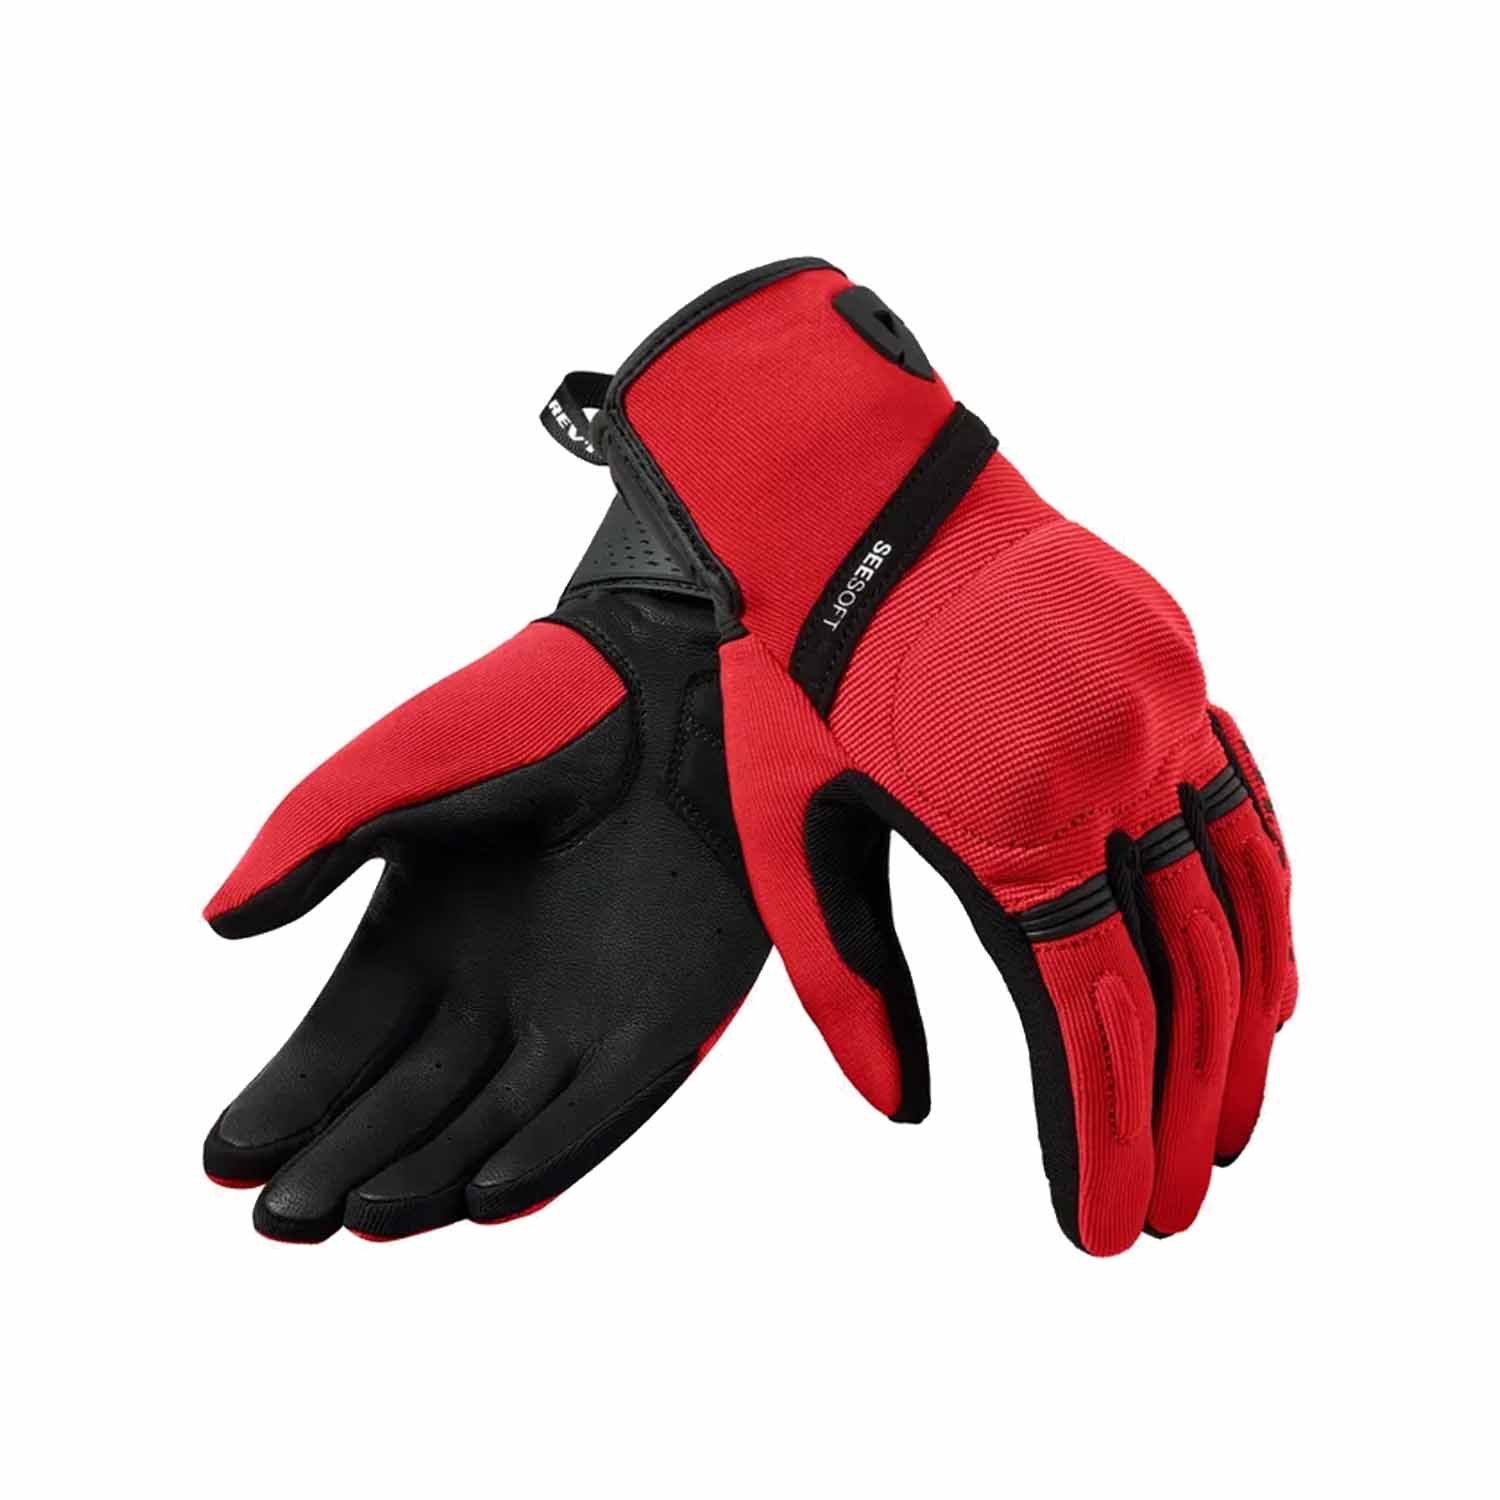 Image of EU REV'IT! Mosca 2 Ladies Gloves Red Black Taille S